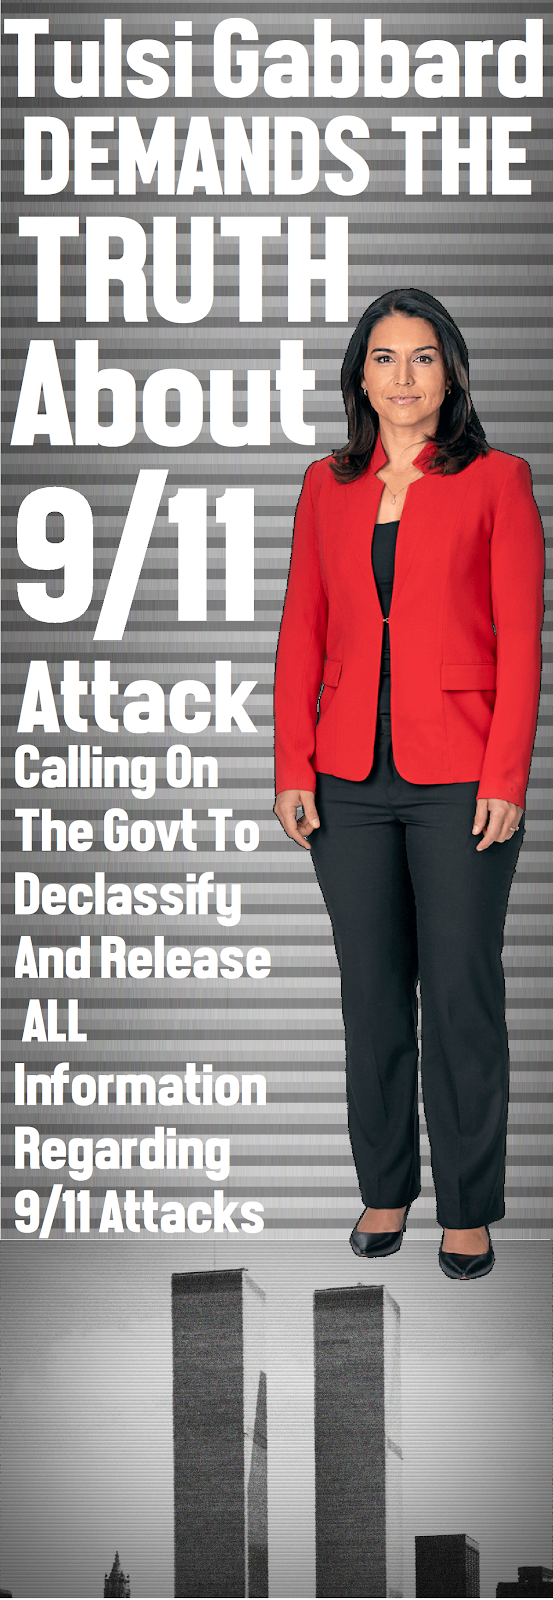 Demand The Truth About The September 11 Attacks